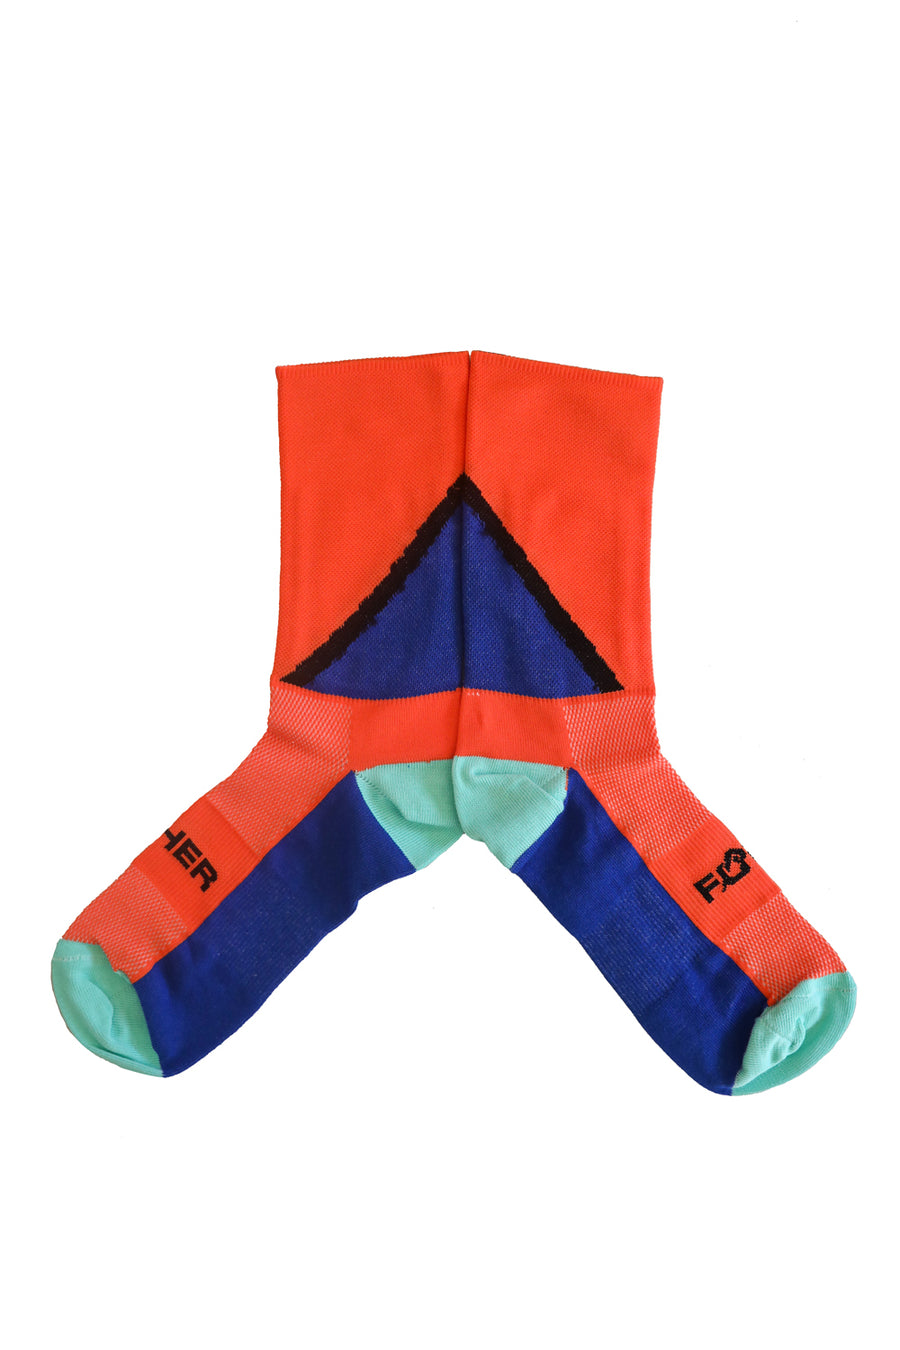 Chase the Mountain O-B Performance Sock